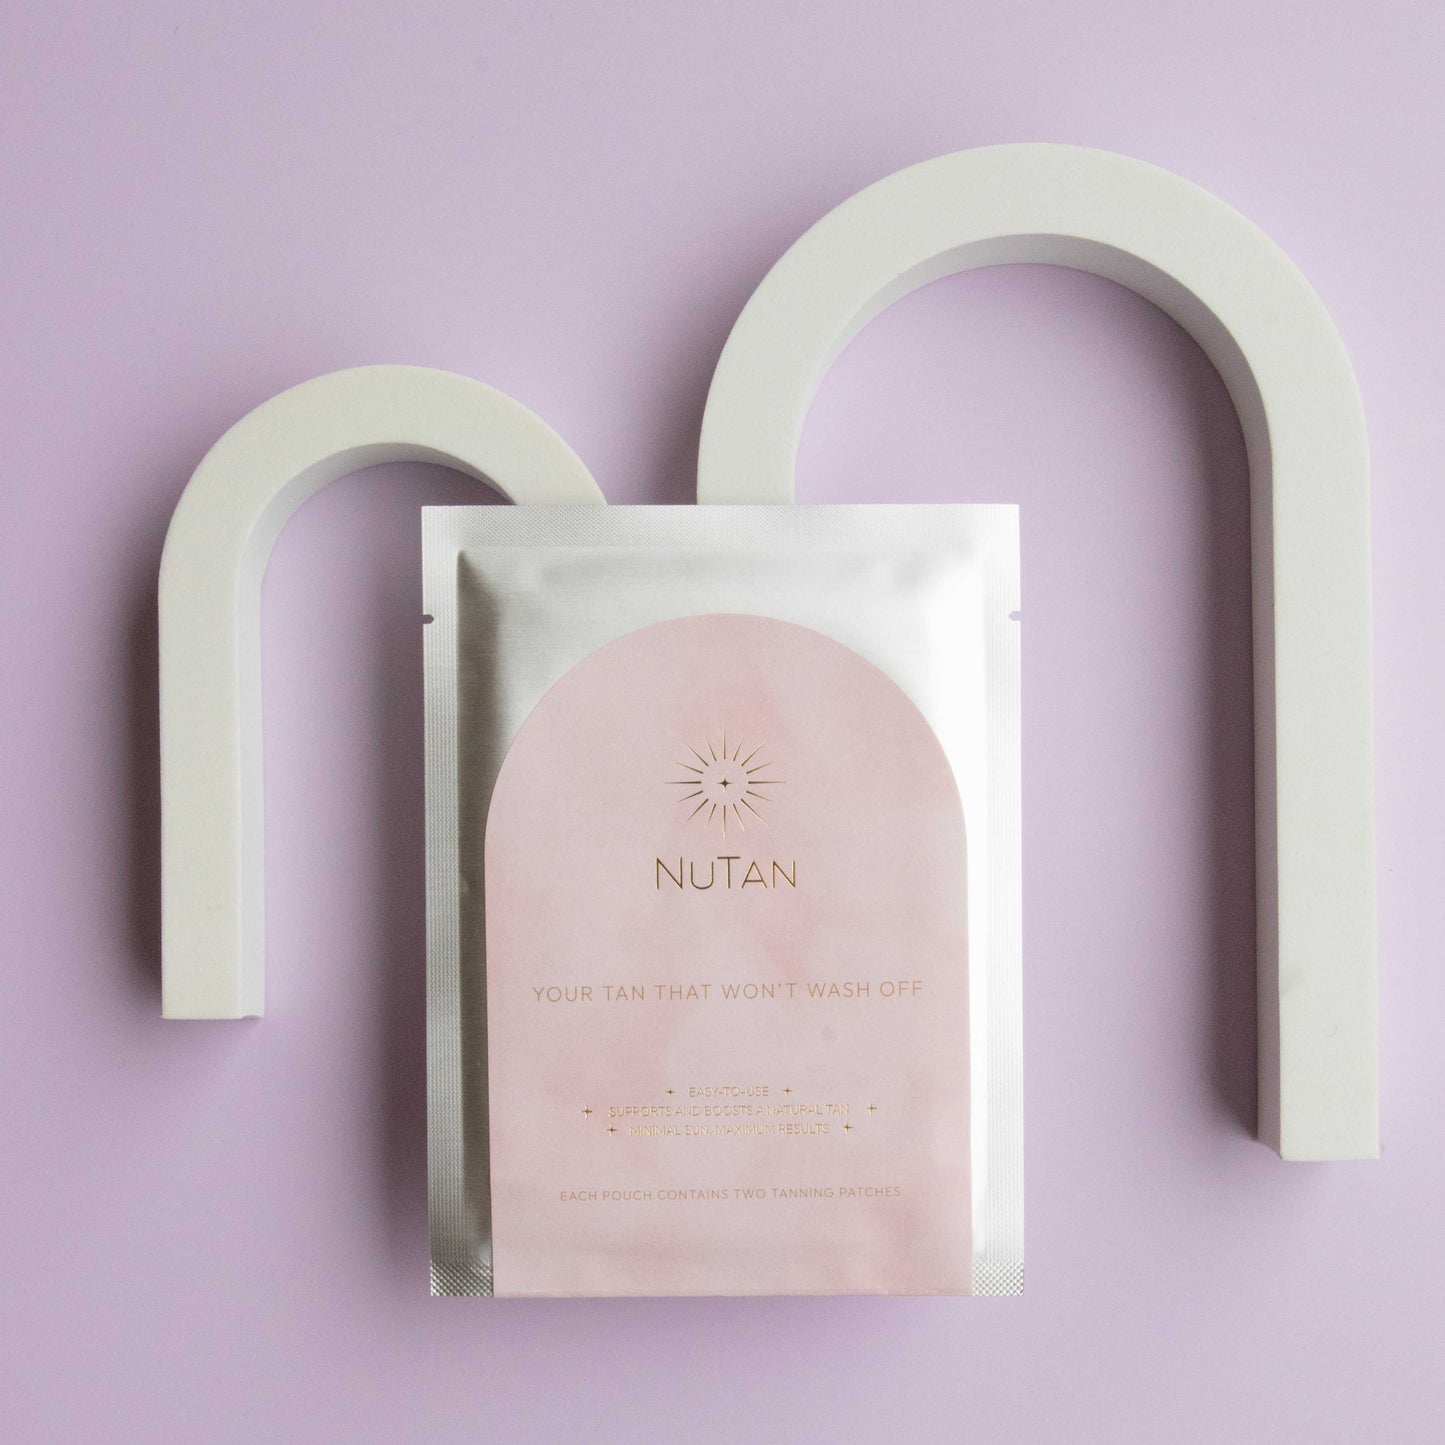 NuTan® kit - 10 tanning patches